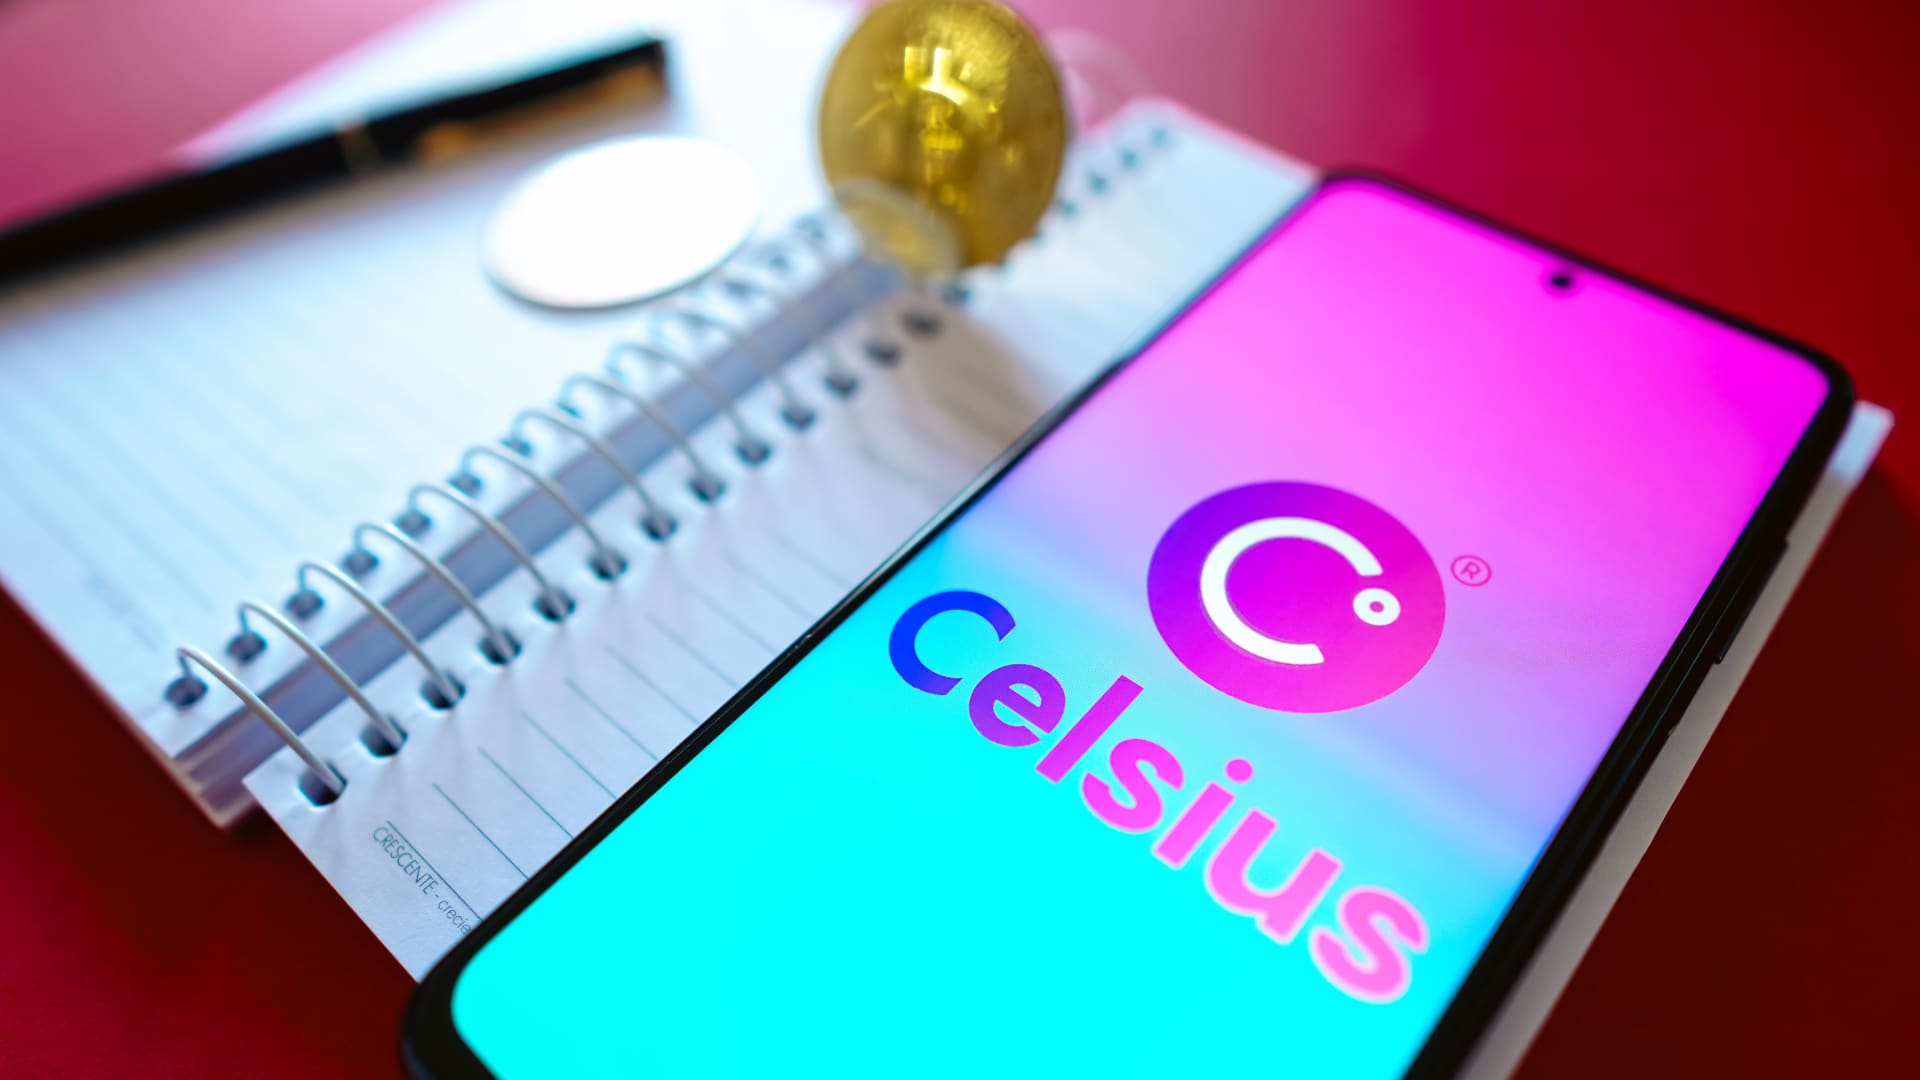 Celsius chief strategy officer S. Daniel Leon is leaving the company, sources say